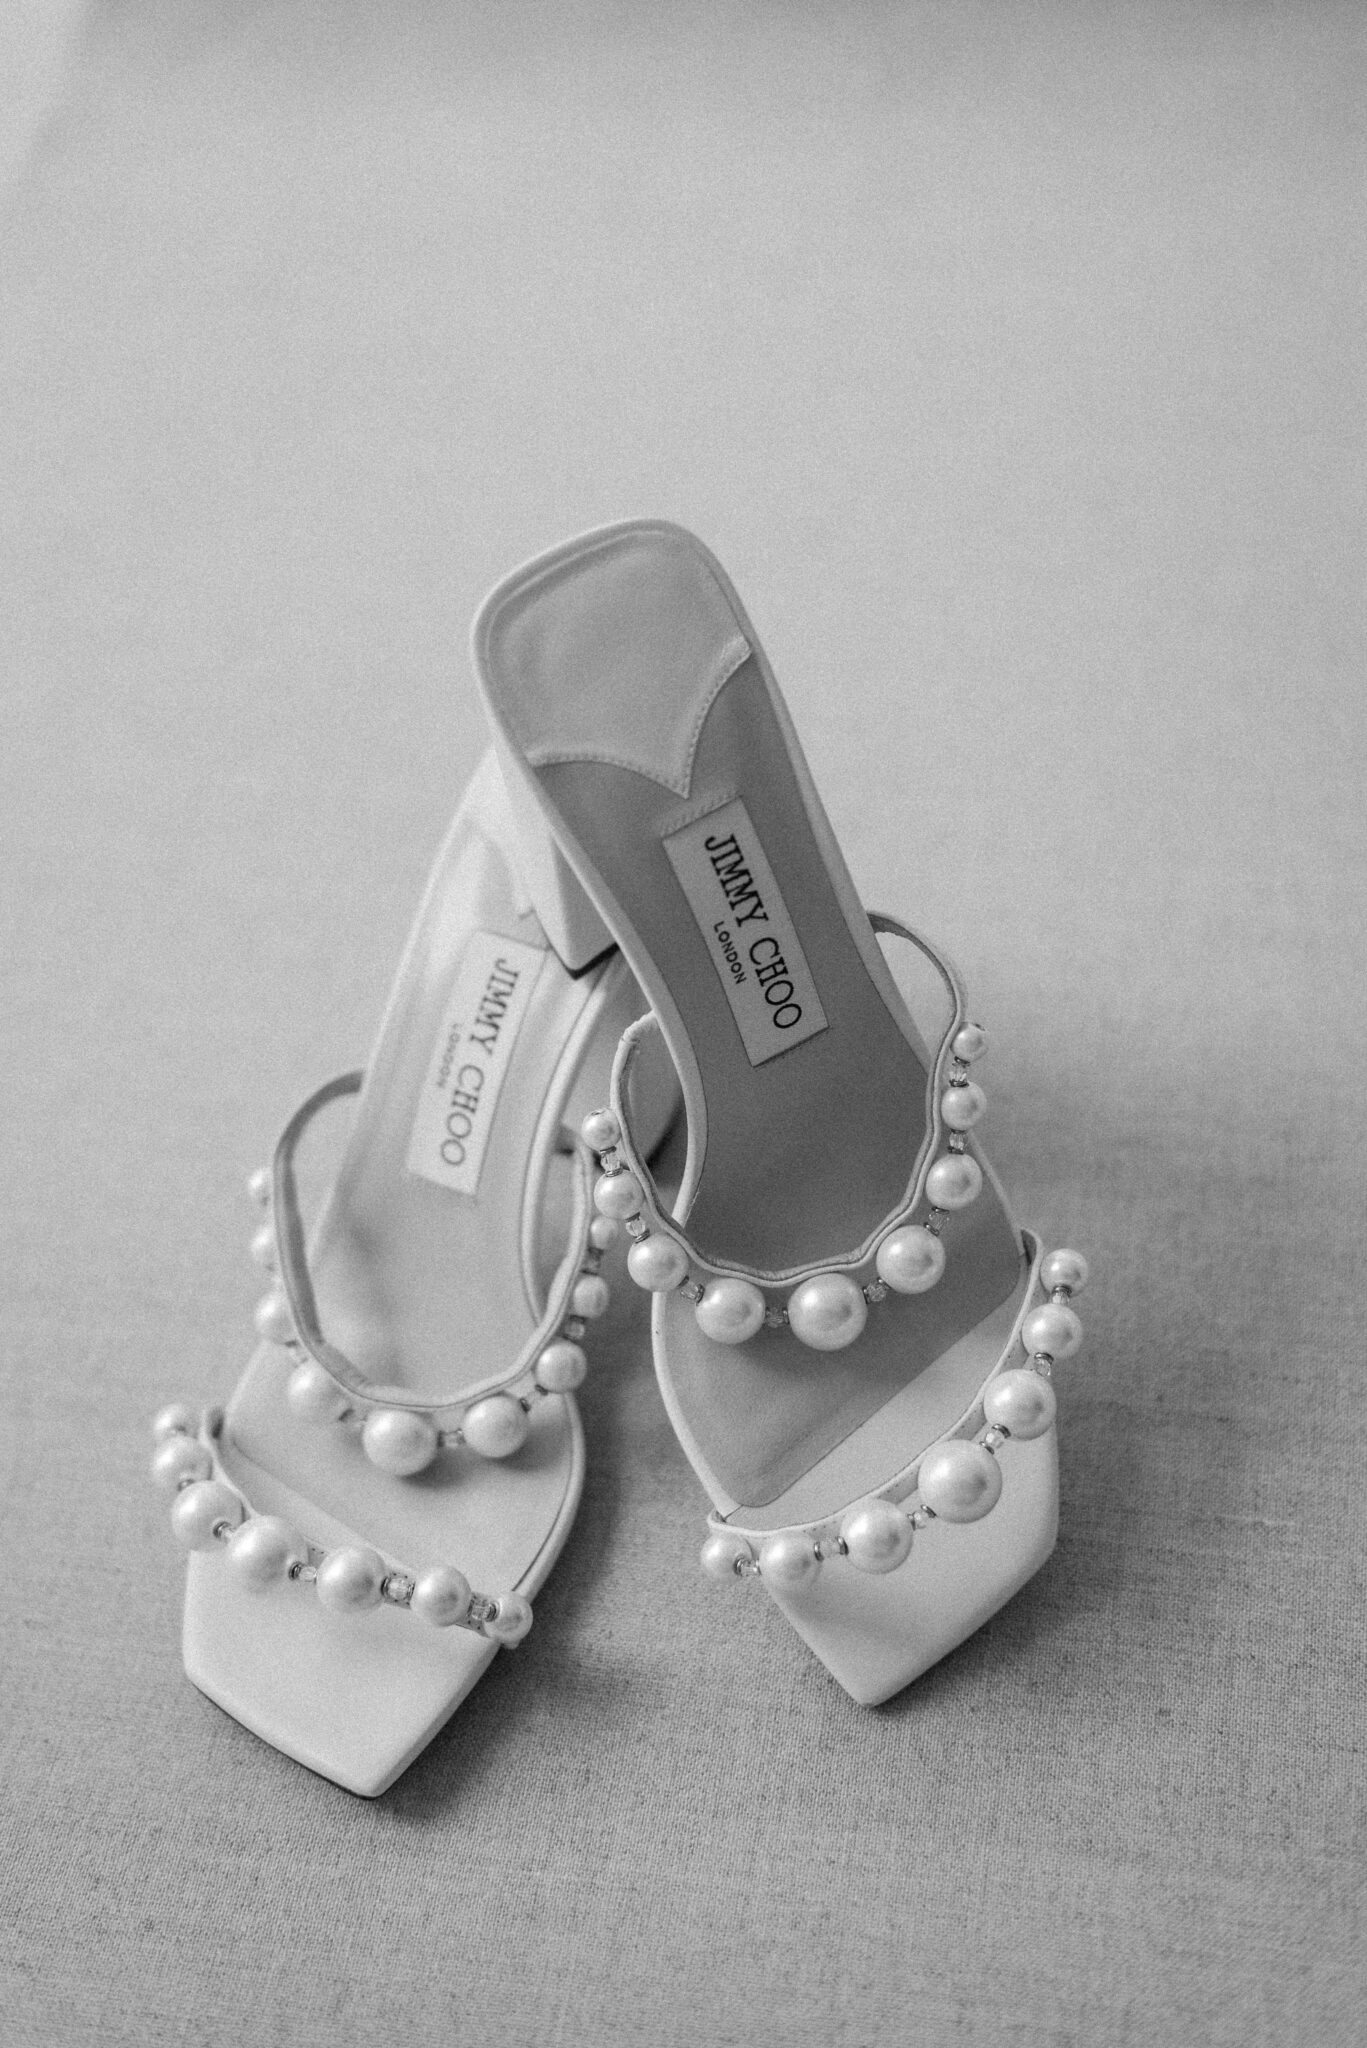 Classic and elegant bridal details featuring Jimmy Choo shoes with large pearl straps captured by Jenny Jean Photography.